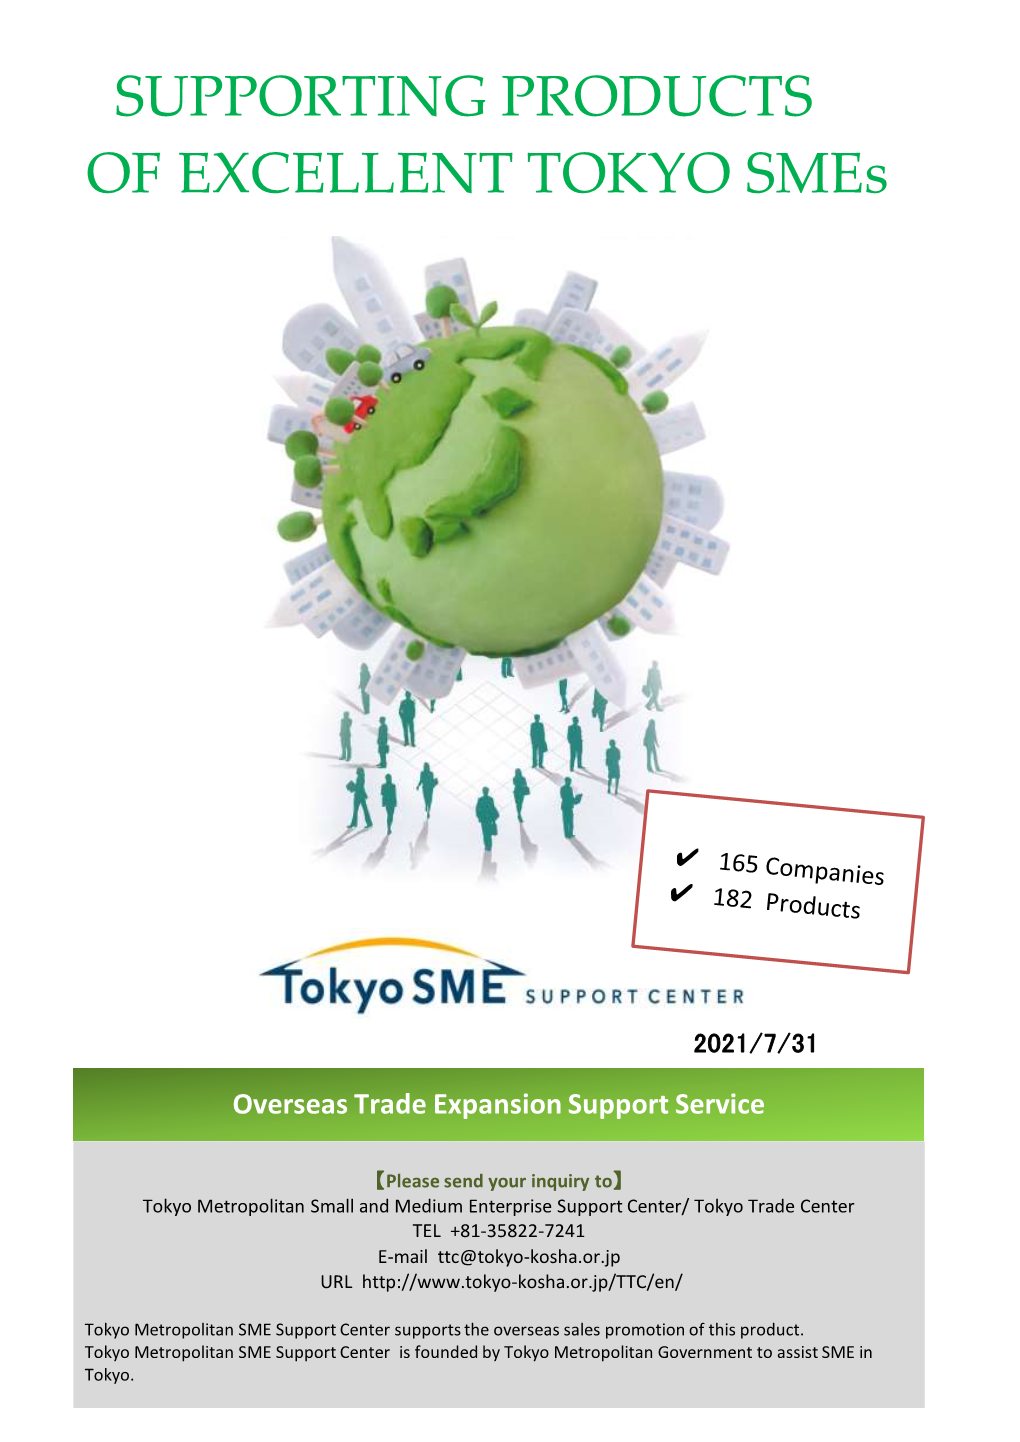 SUPPORTING PRODUCTS of EXCELLENT TOKYO Smes